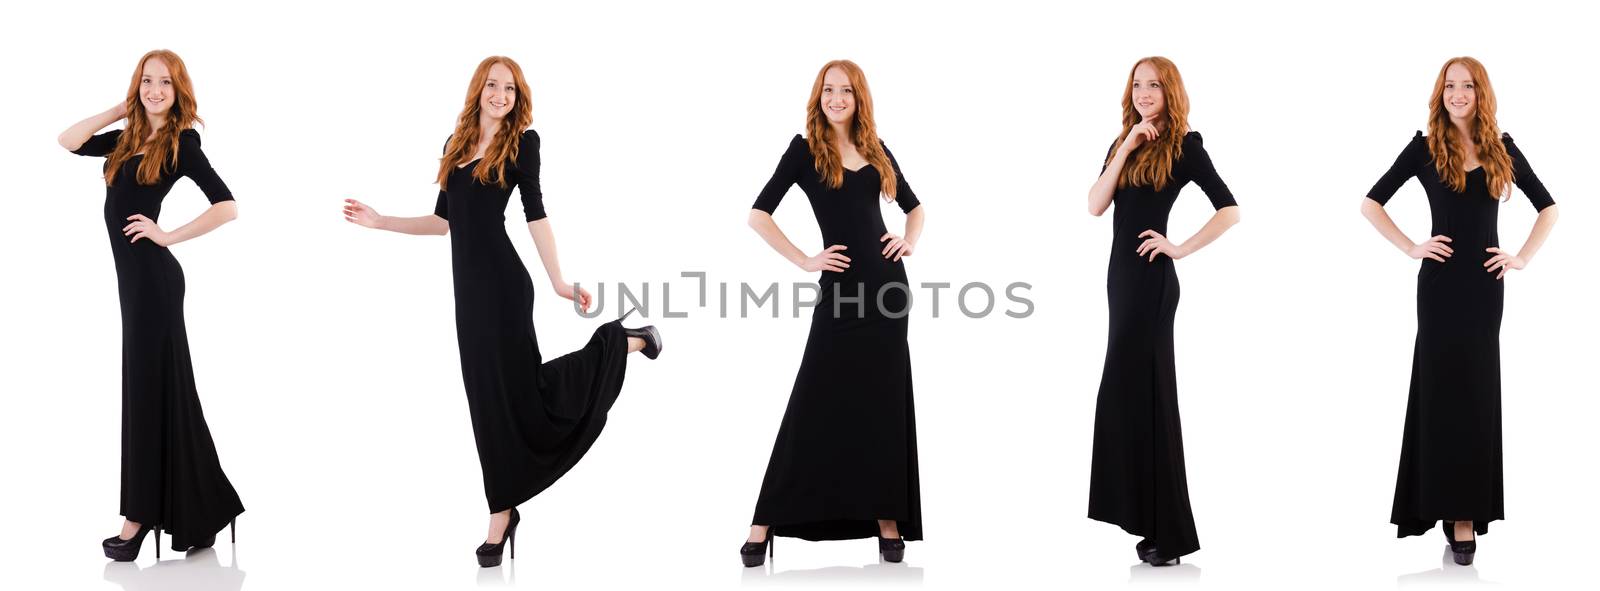 Redhead in black dress isolated on white by Elnur